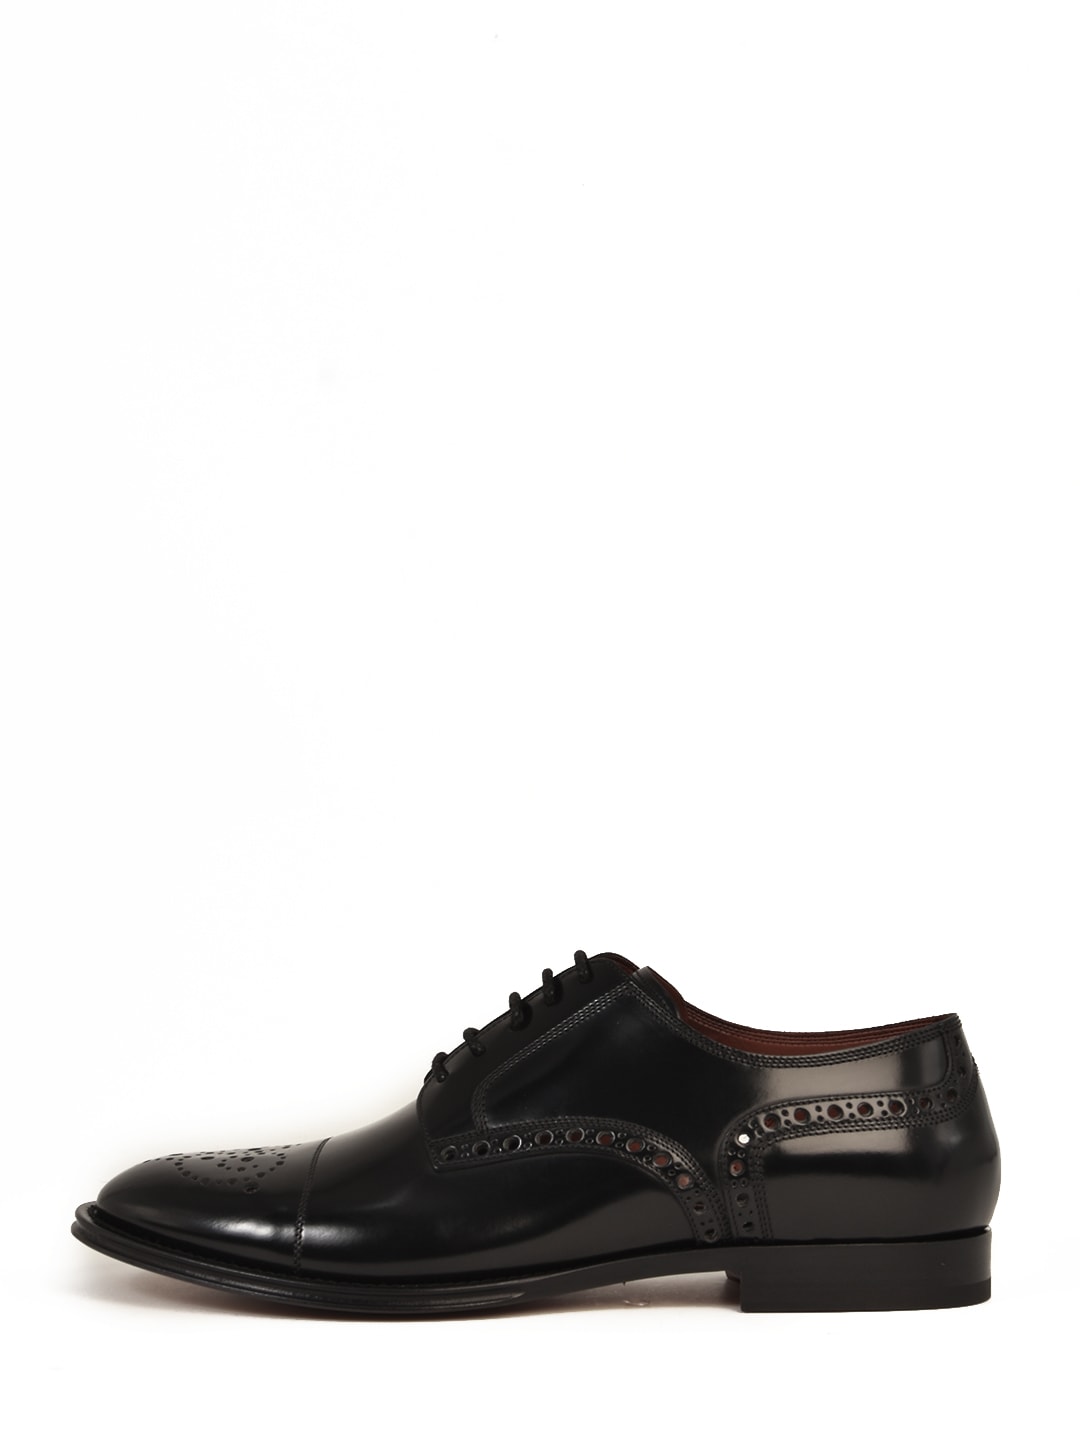 DOLCE & GABBANA DUILIO LEATHER SHOES,11211184